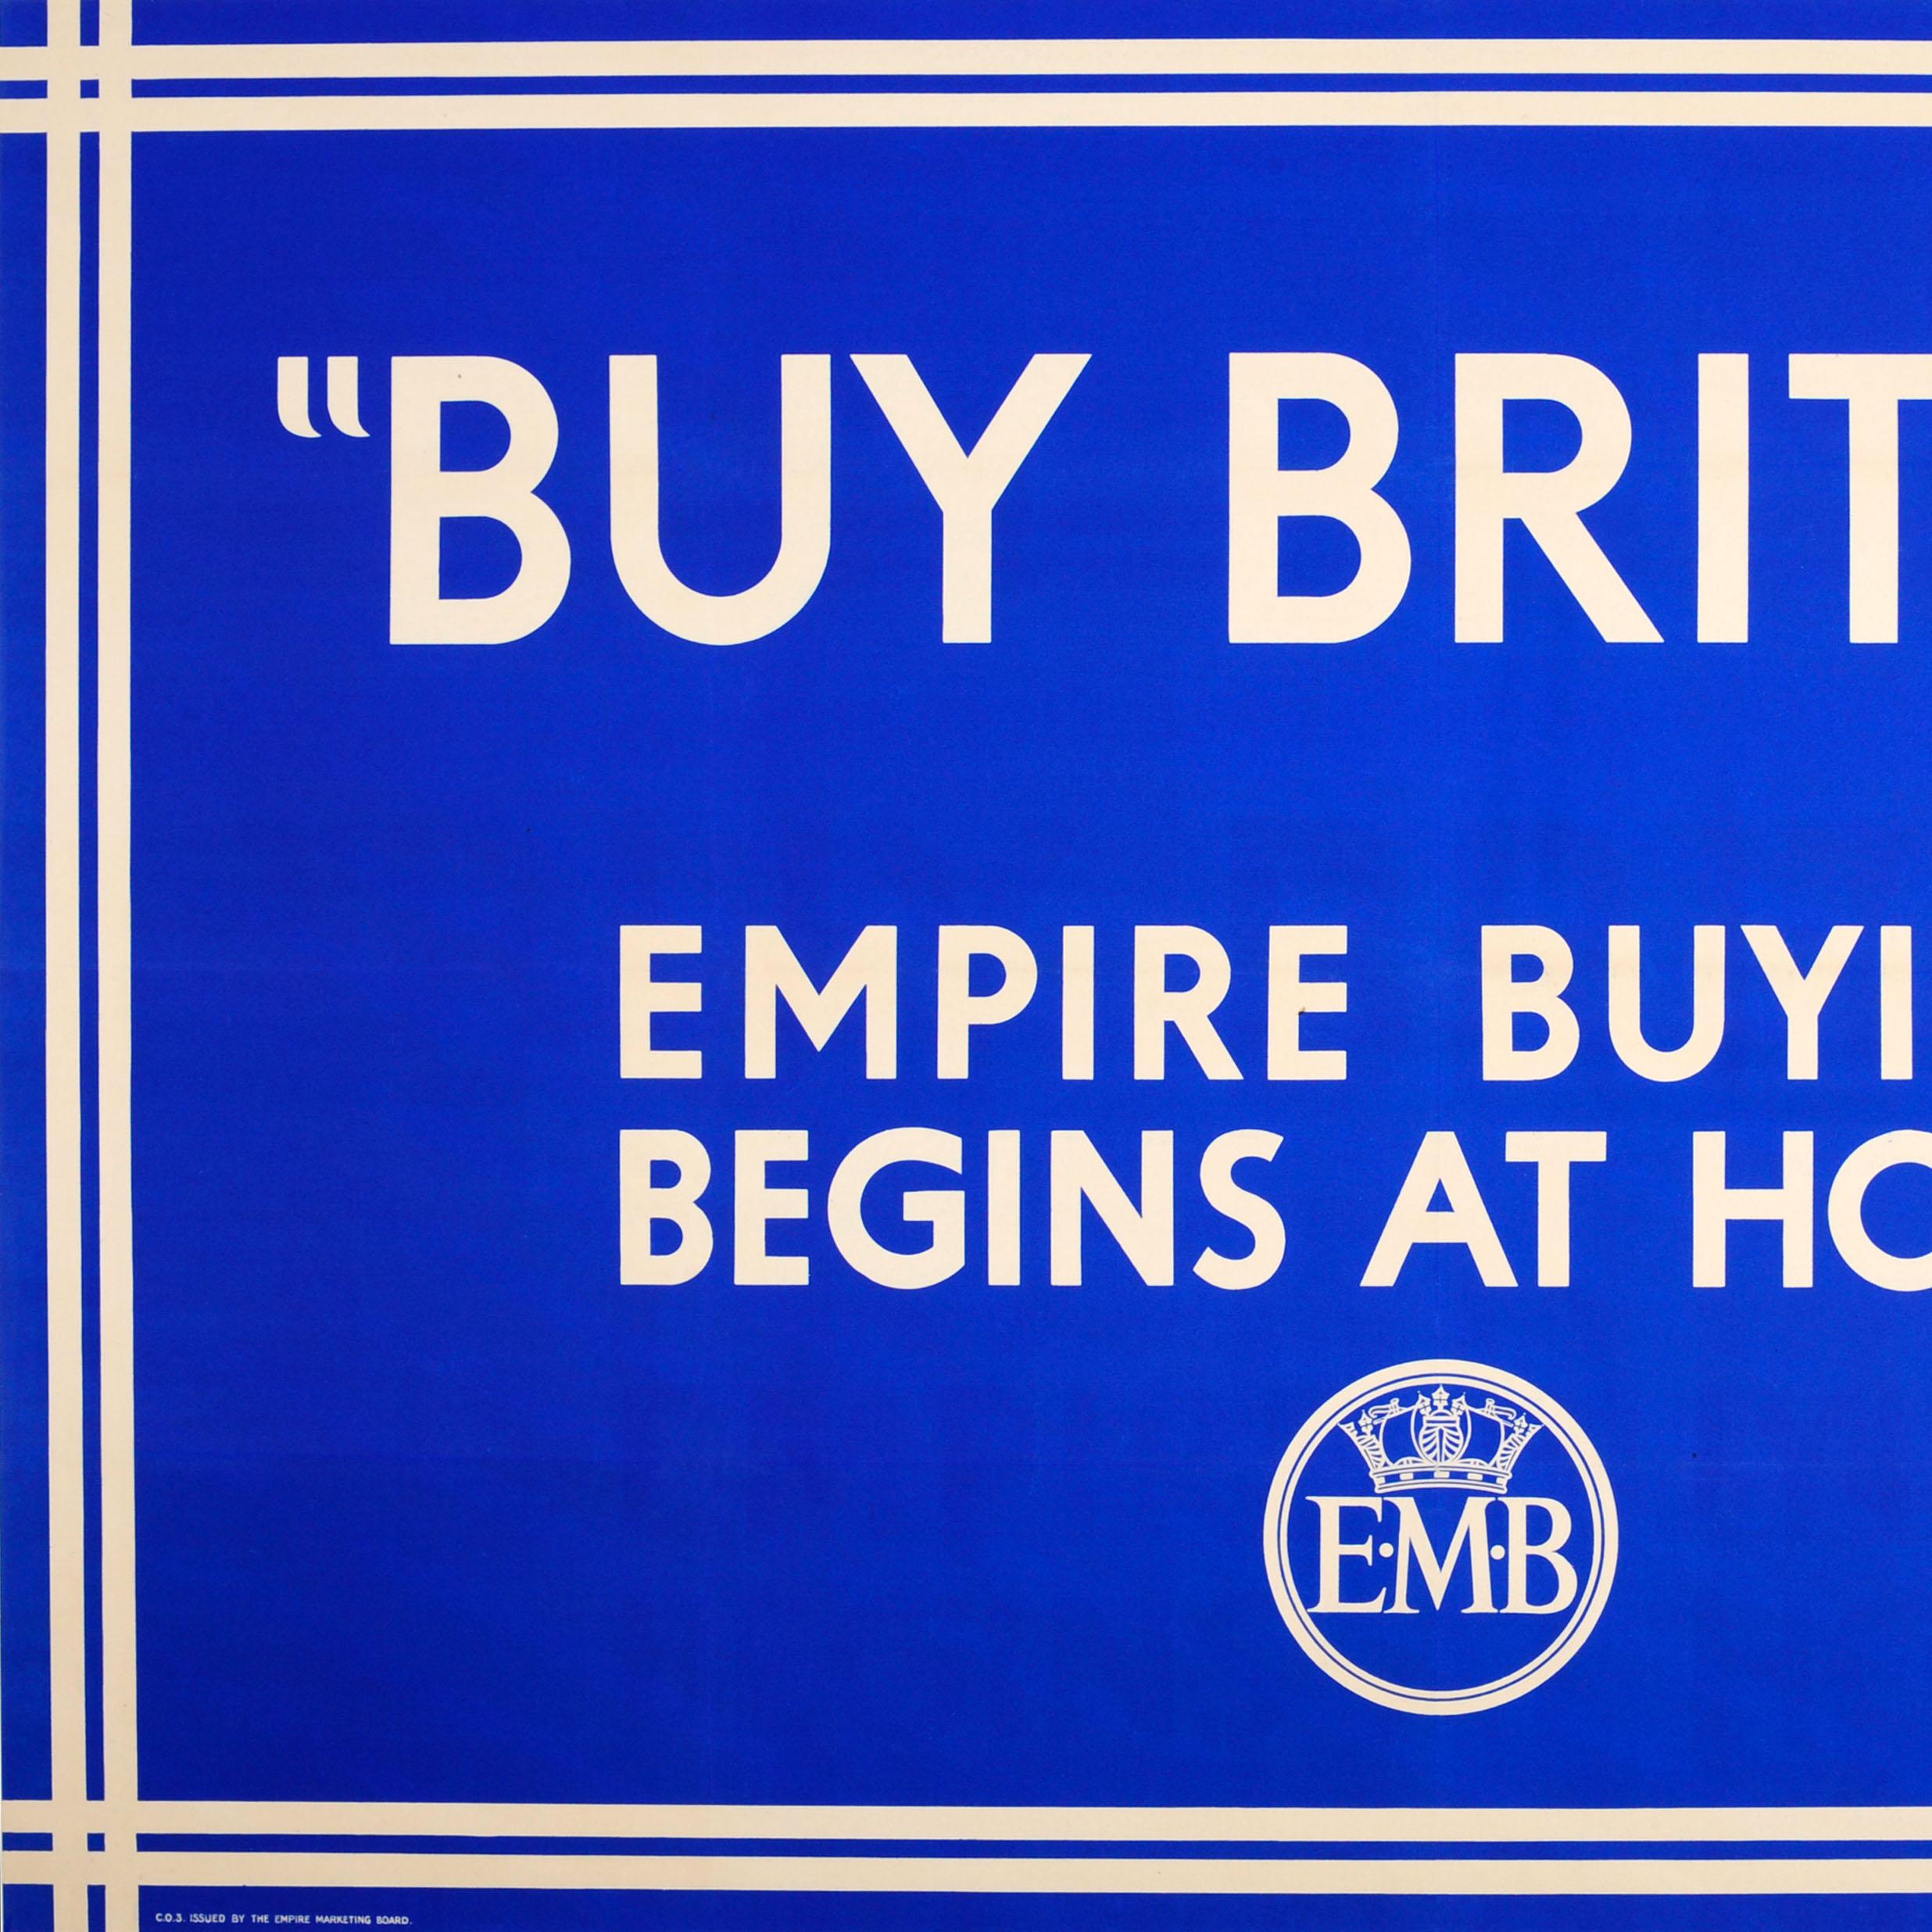 Original vintage advertising poster issued by Empire Marketing Board - Buy British Empire Buying Begins At Home - featuring an iconic simple design in the Keep Calm and Carry On style with the white text on a blue background and the EMB crown logo